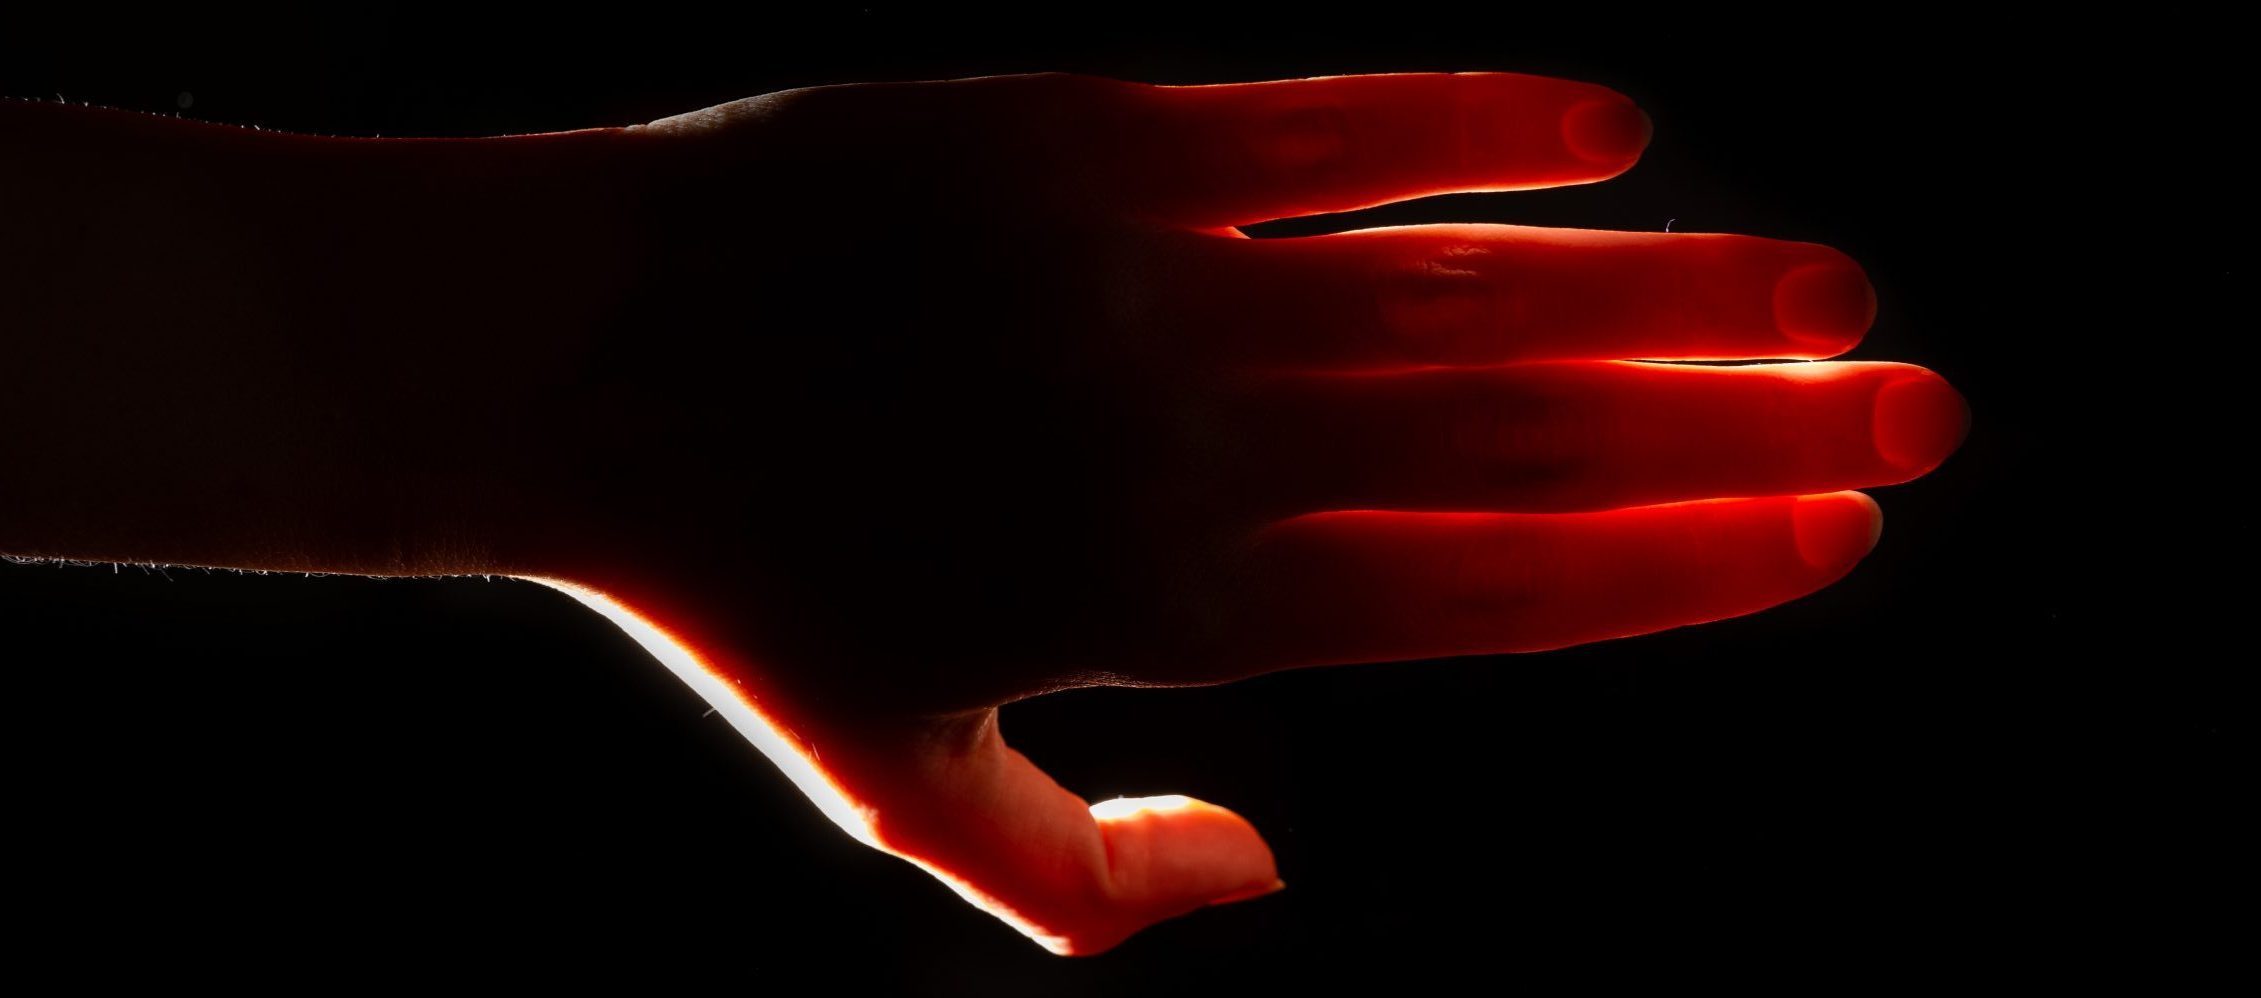 A left hand shown with its fingers outstretched. The hand is in front of a black background, but there is a bright light illuminating the hand from behind.